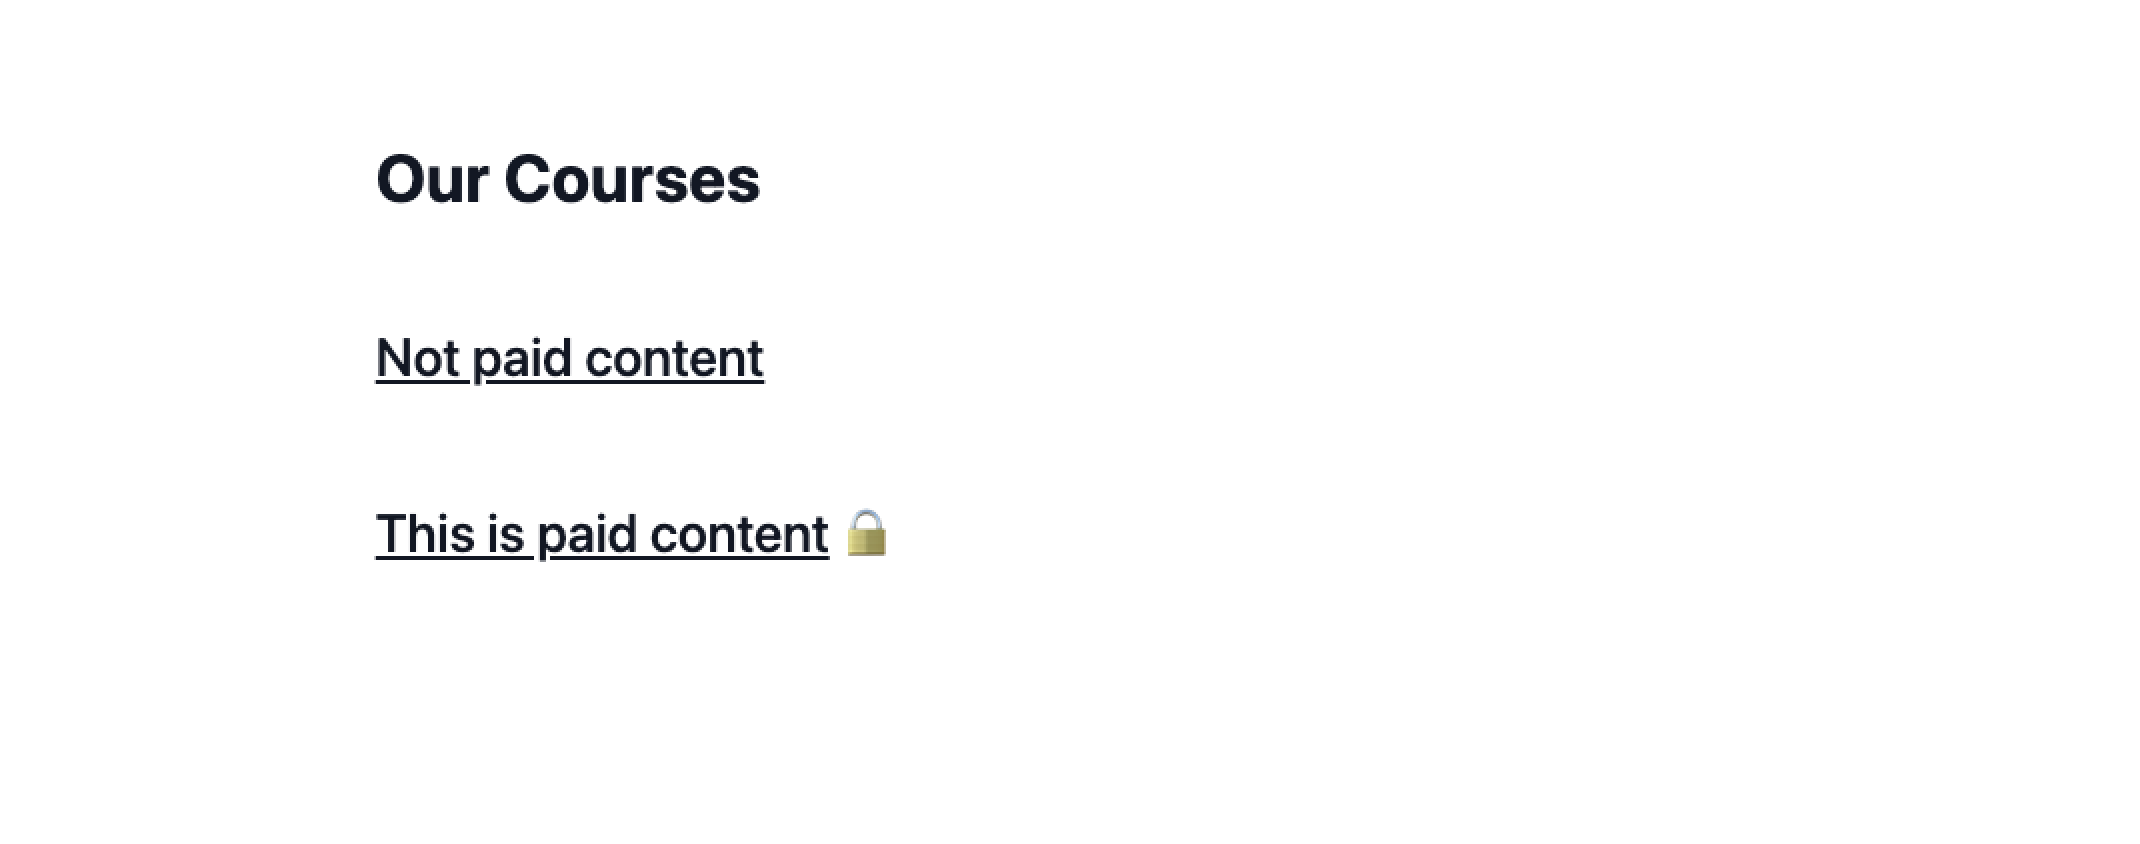 Screen with "our courses" and two courses listed below named "Paid content" and "Not paid content"